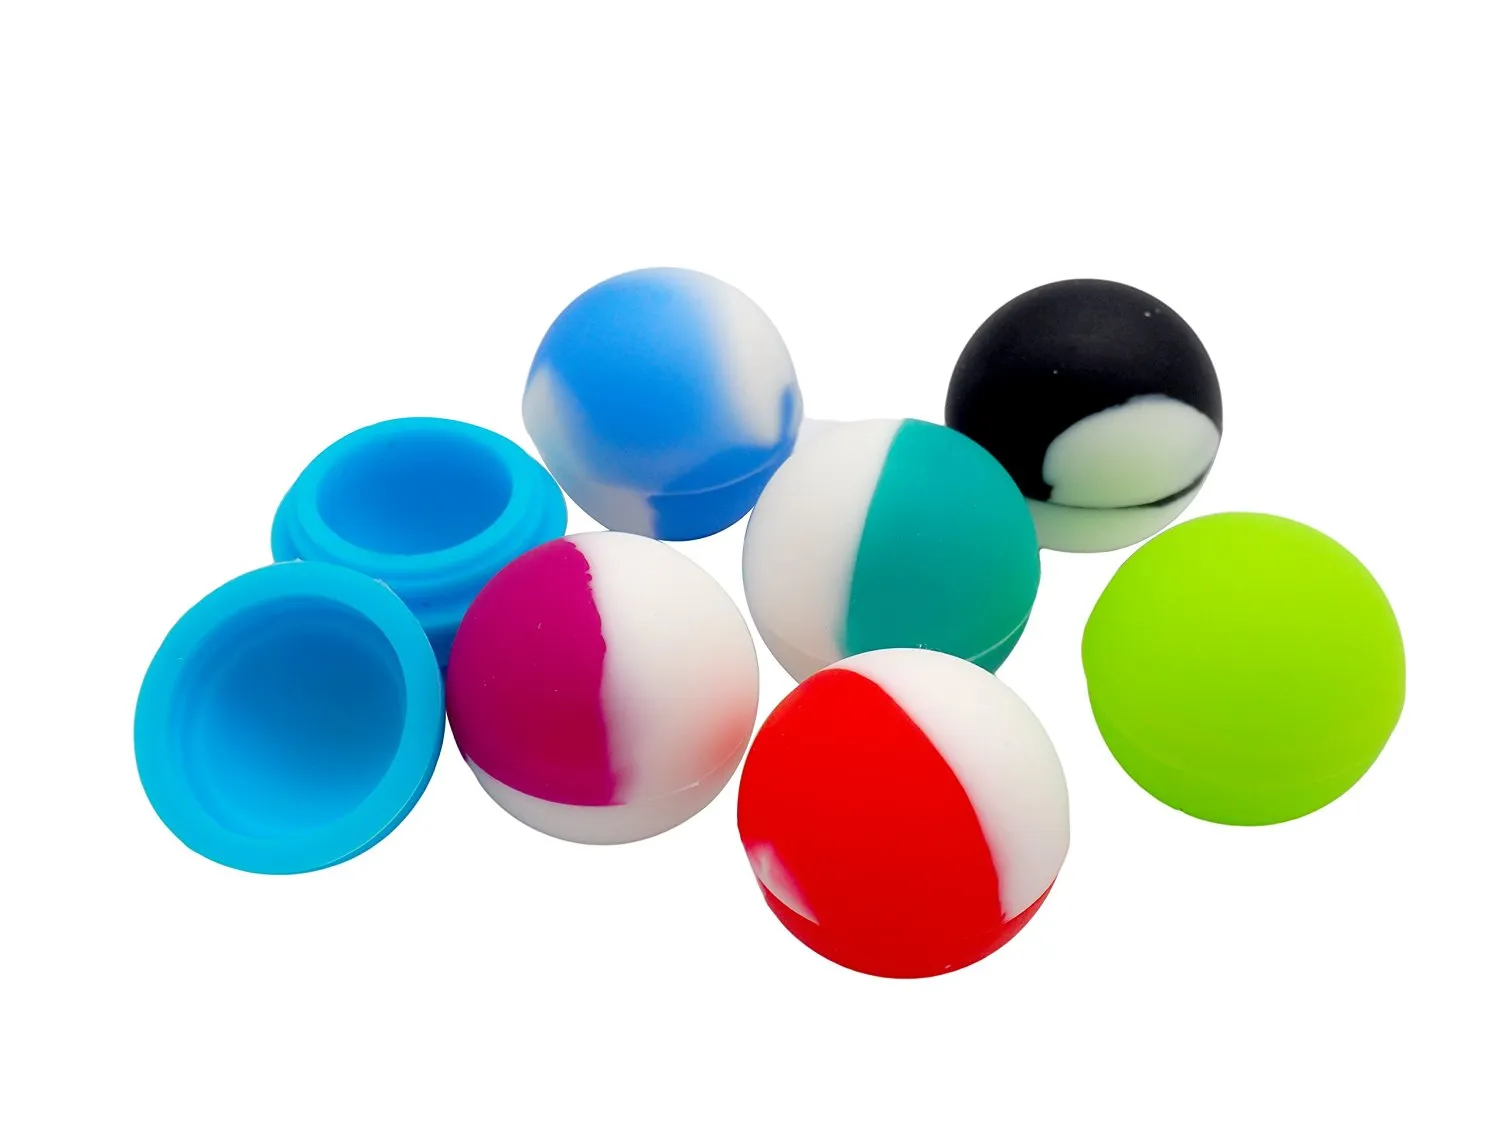 Sample- 1 piece Colorful Non-stick Silicone Ball Container For Wax Bho Oil Butane Vaporizer Silicon Jars Dab Wax Container